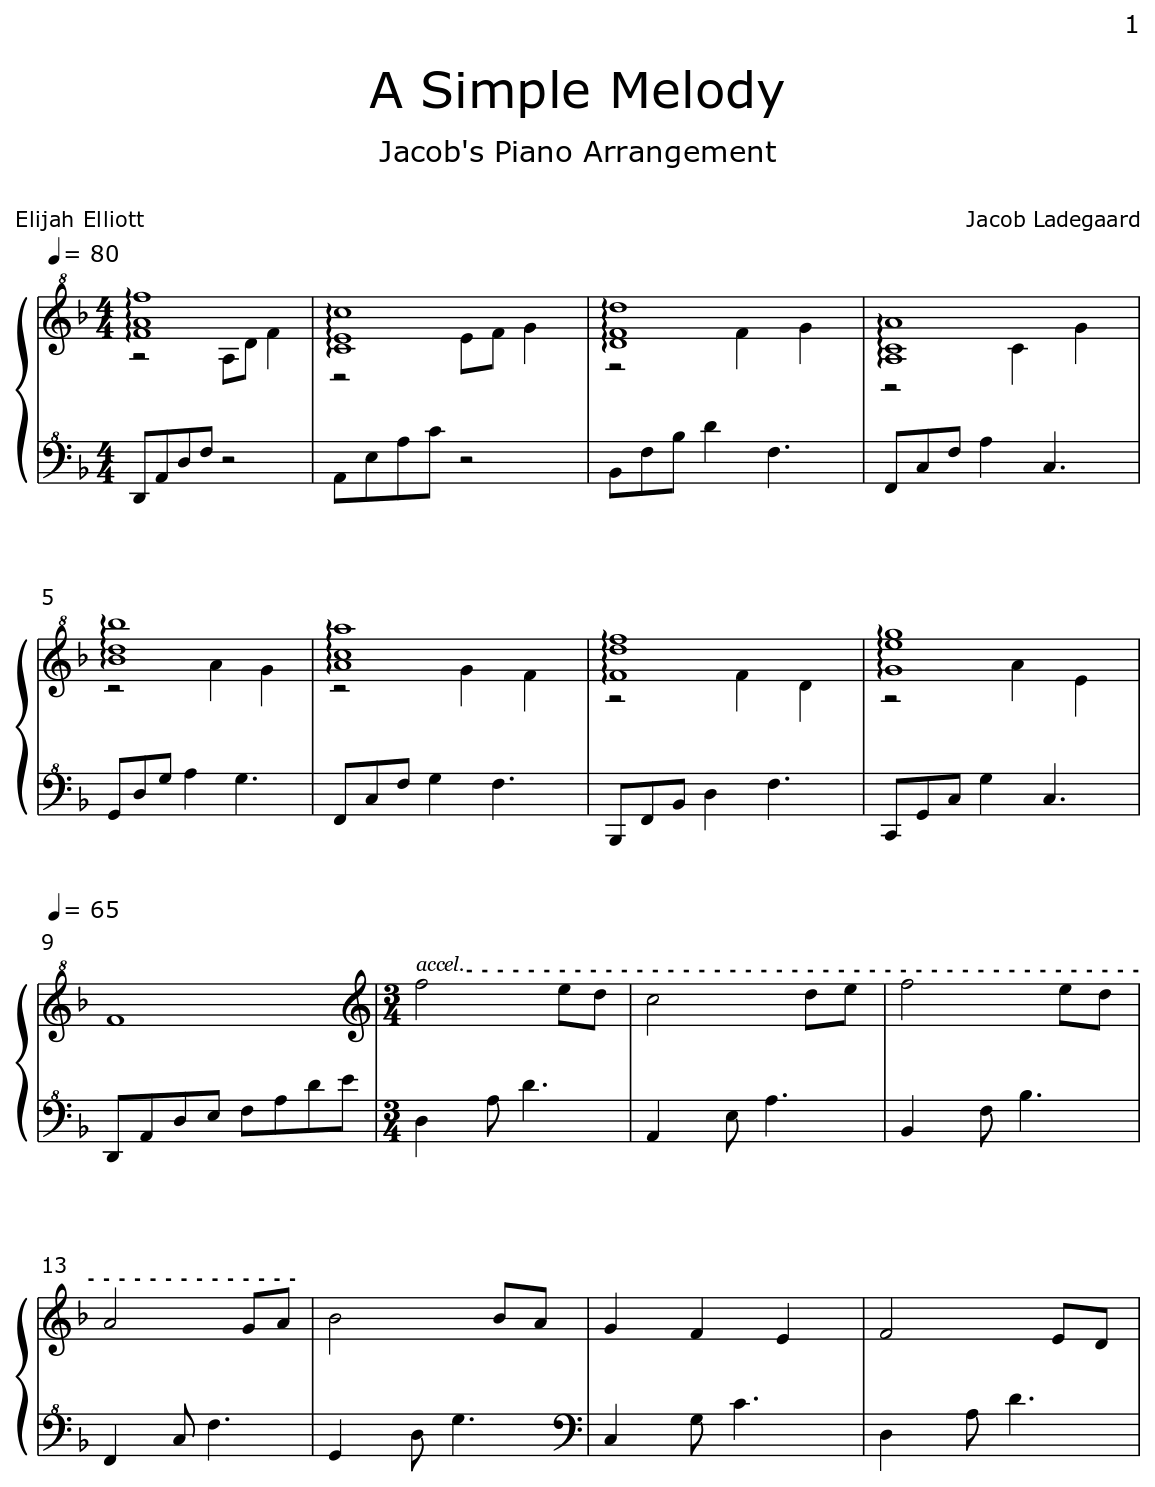 A Simple Melody - Sheet music for Piano